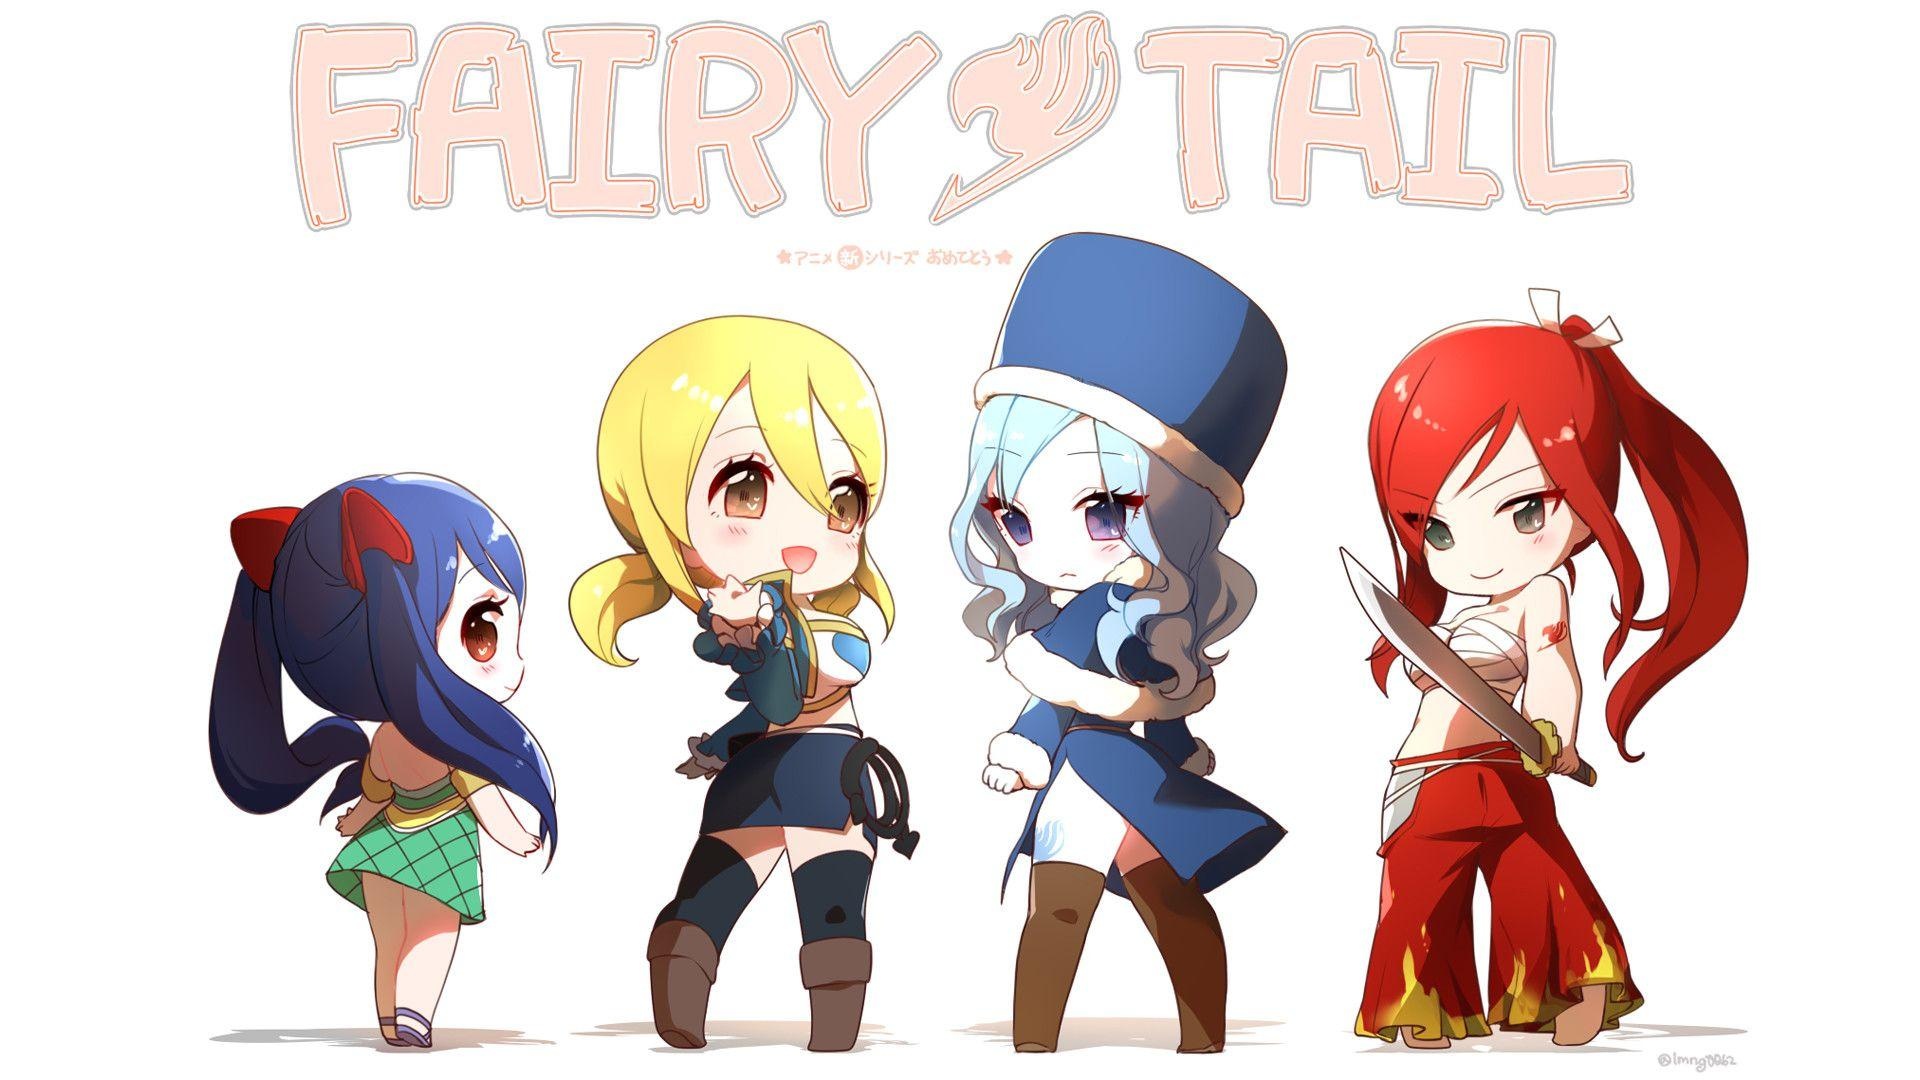 Chibi, Fairy Tail, Whimsical wallpapers, Petite forms, 1920x1080 Full HD Desktop